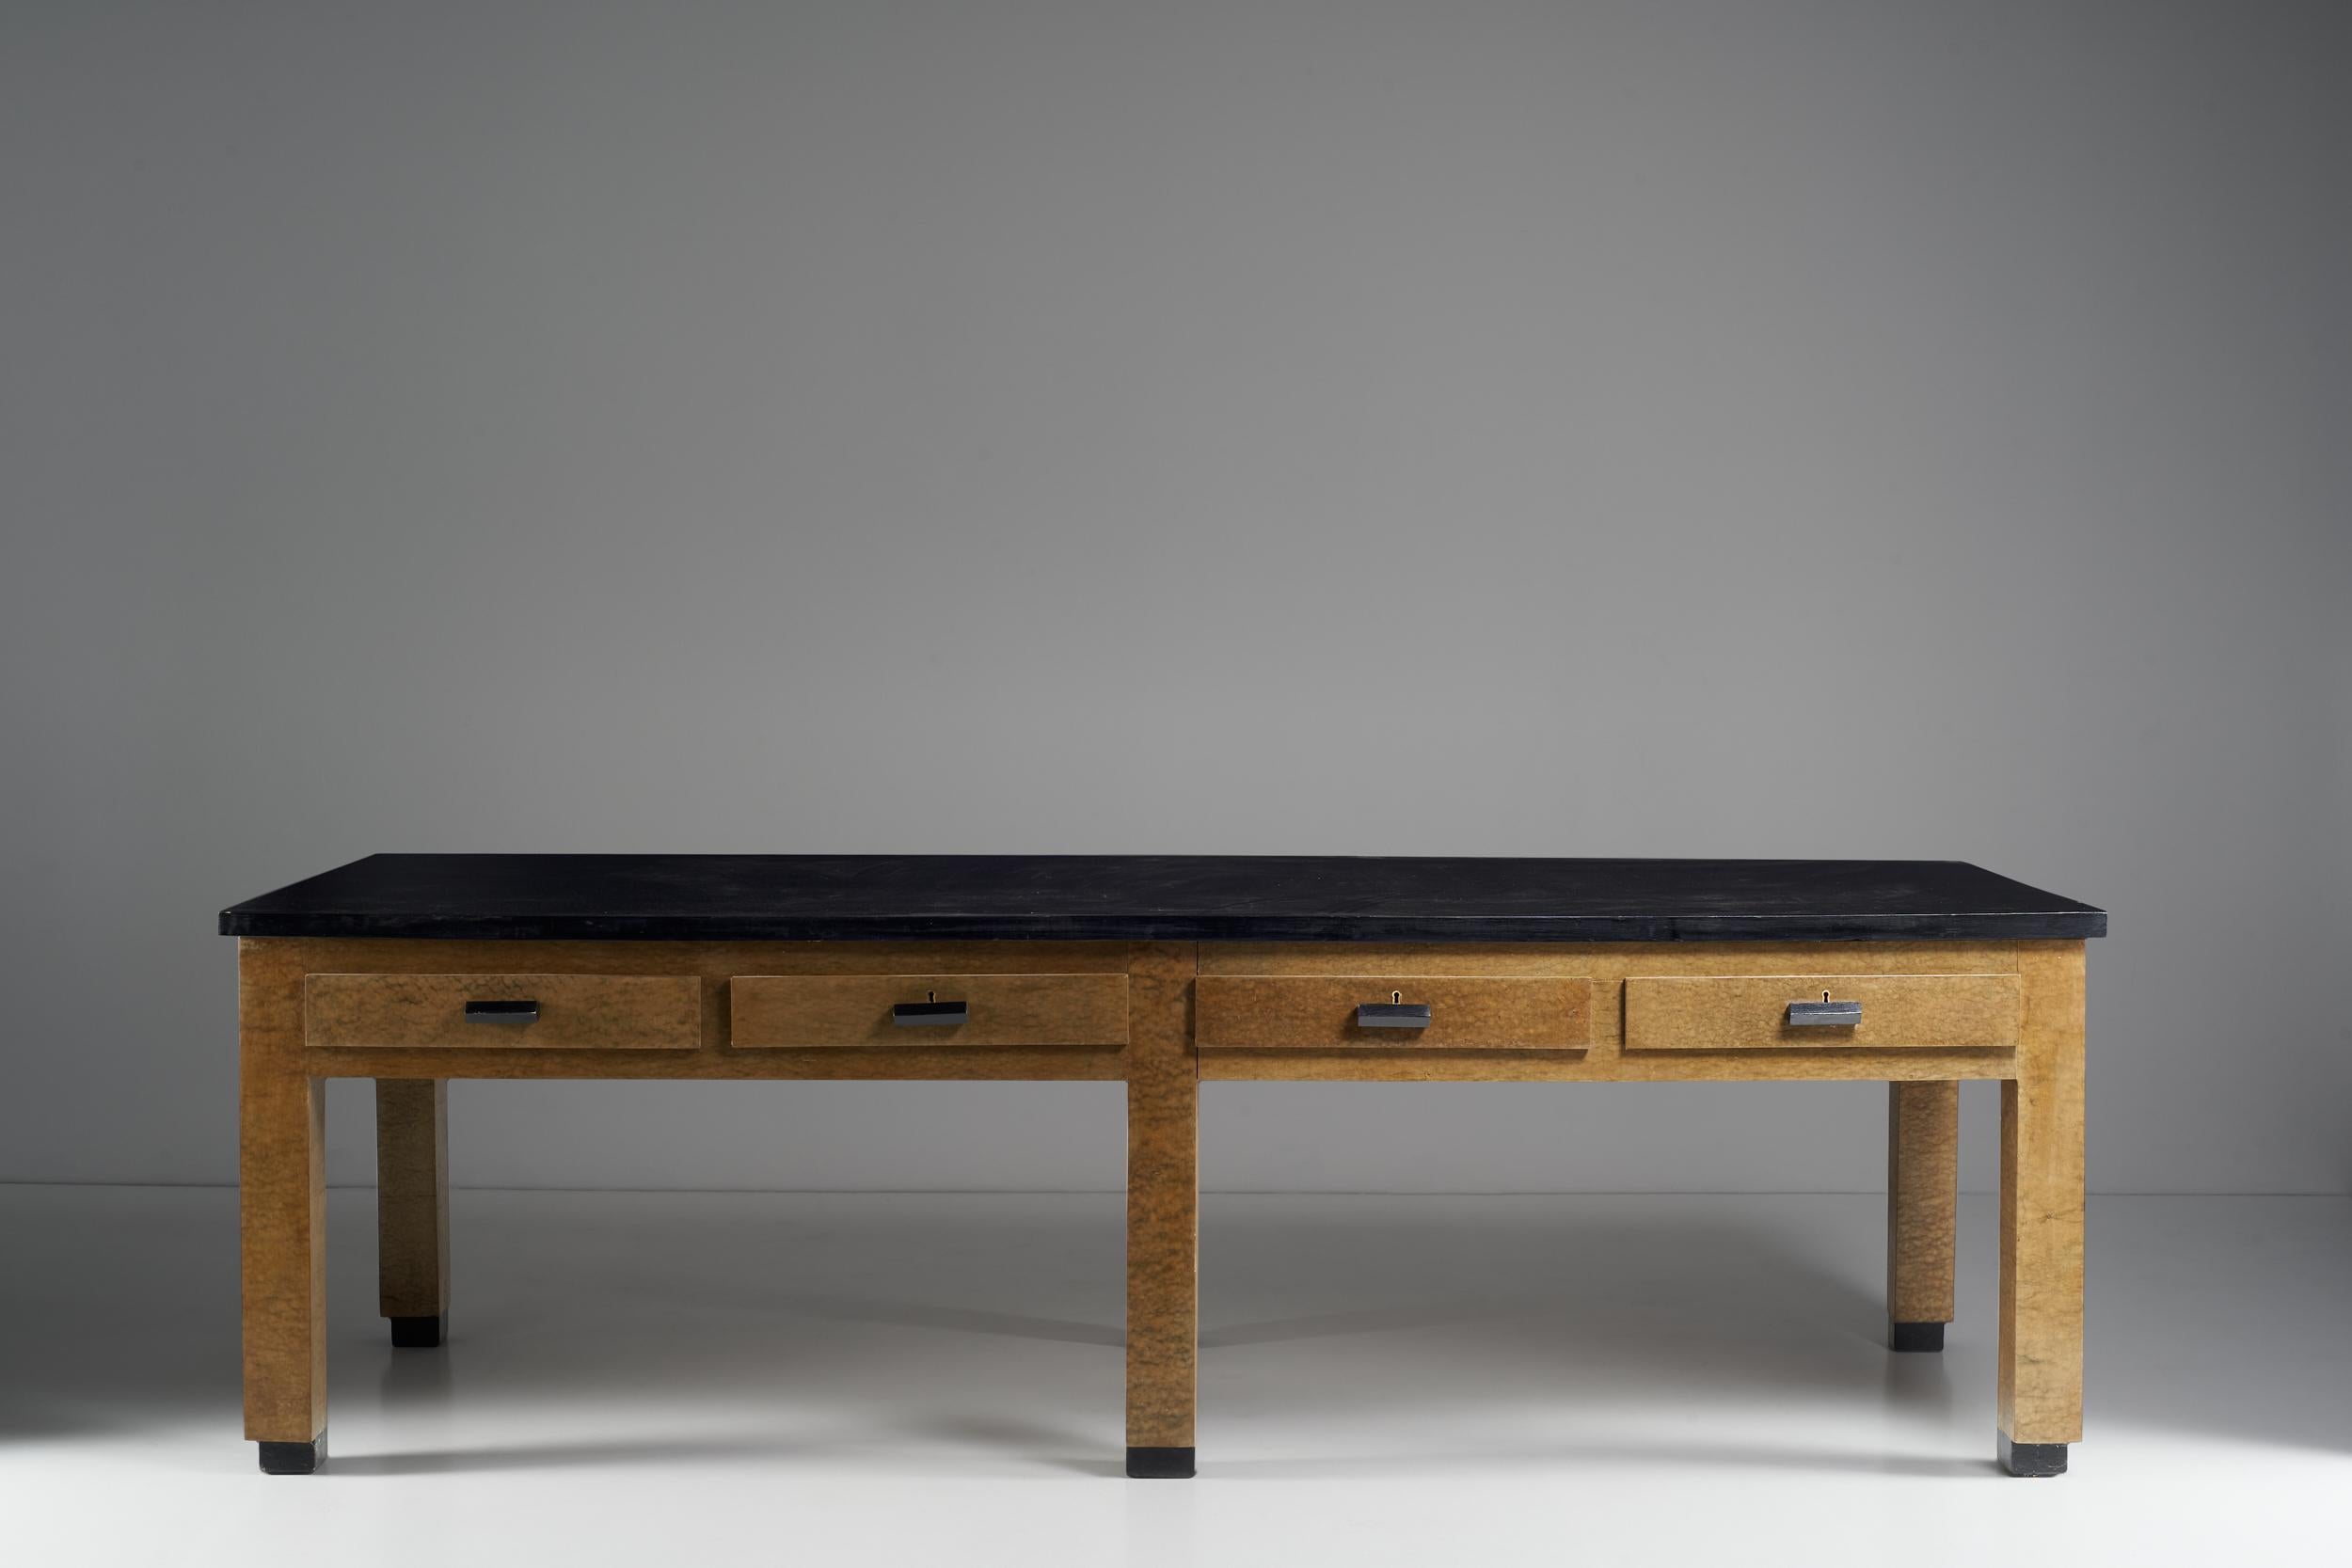 The immense accounting table designed by Giuseppe Pagano Pogatshnig and Levi-Montalcini, defined according to basic symmetrical criteria, is both a table deeply functional to the role for which it was created and extremely different. The